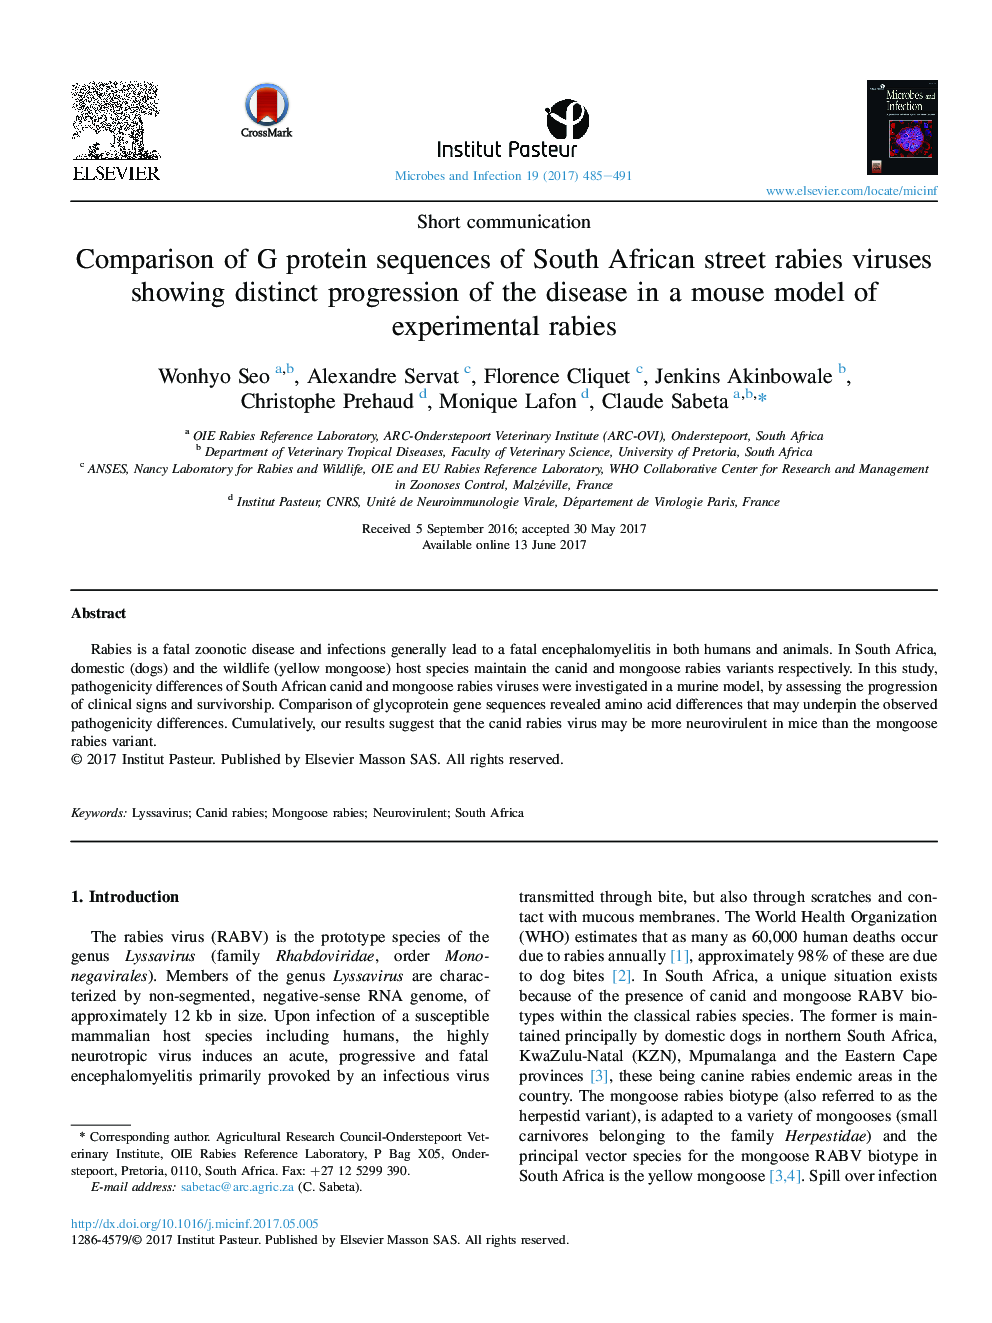 Comparison of G protein sequences of South African street rabies viruses showing distinct progression of the disease in a mouse model of experimental rabies